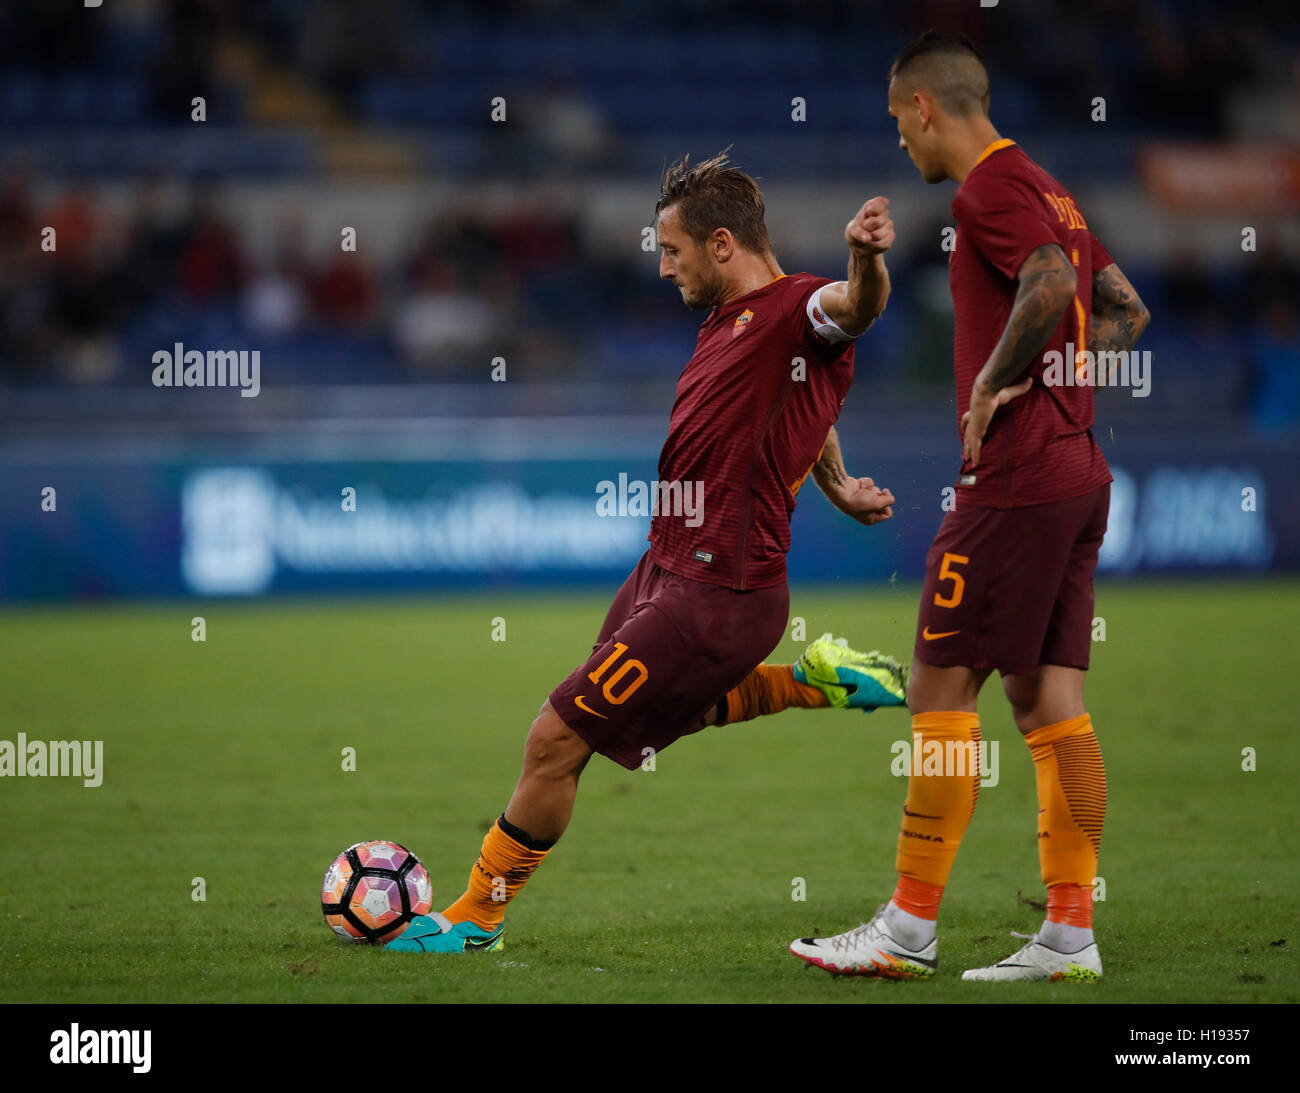 Rome, Italy. 21st Sep, 2016. Roma's Francesco Totti, left, flanked by  teammate Leandro Paredes, kicks the ball during the Serie A soccer match  between Roma and Crotone at the Olympic stadium. Roma